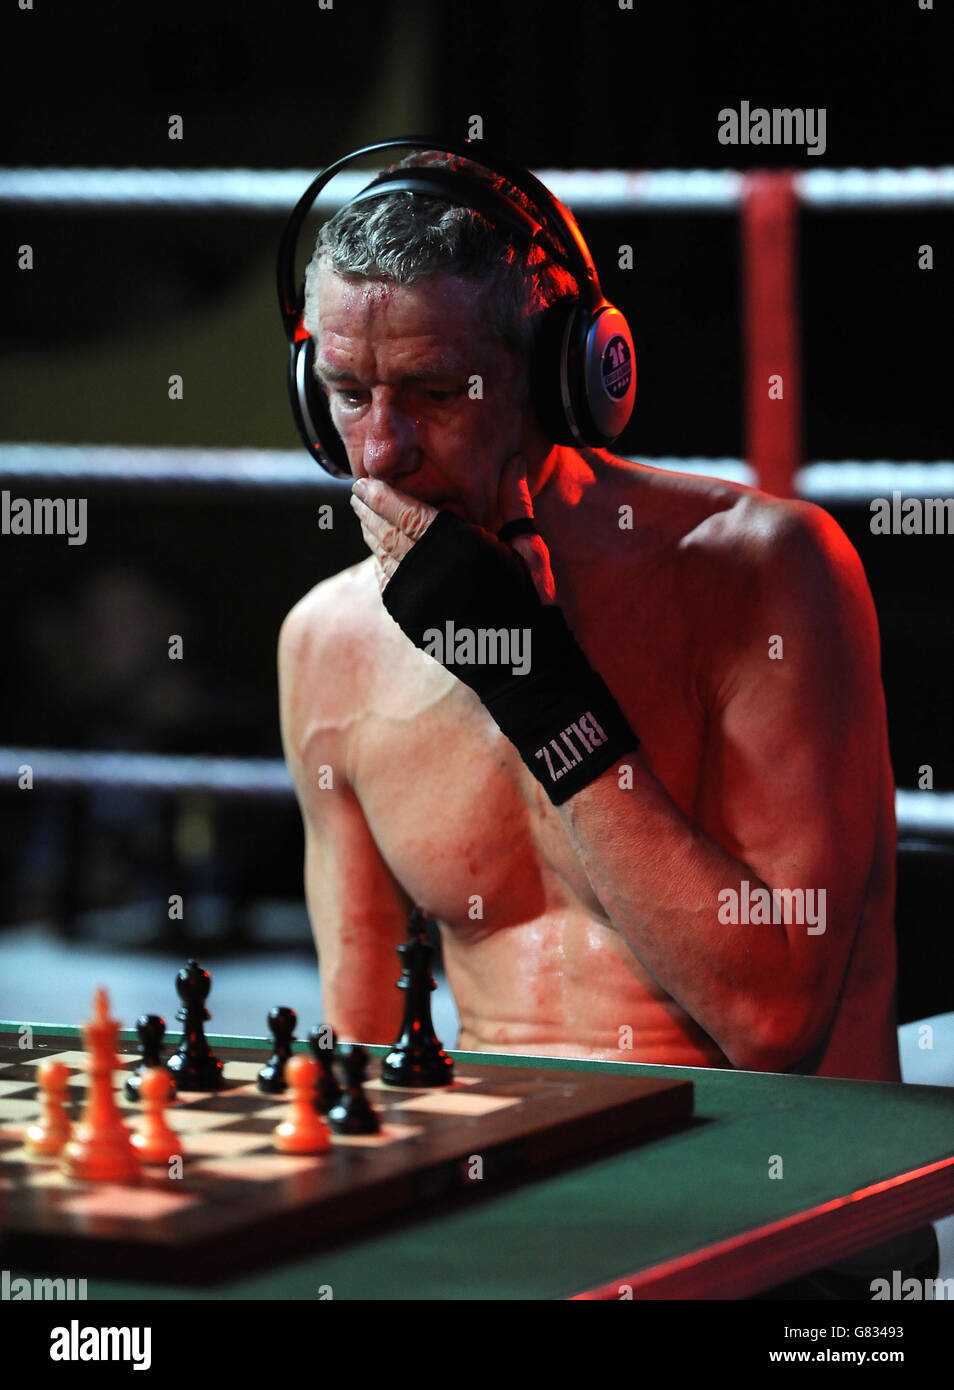 Terry Marsh contemplates his next chess move during his match against Dymer Agasaryan at Scala, London Stock Photo